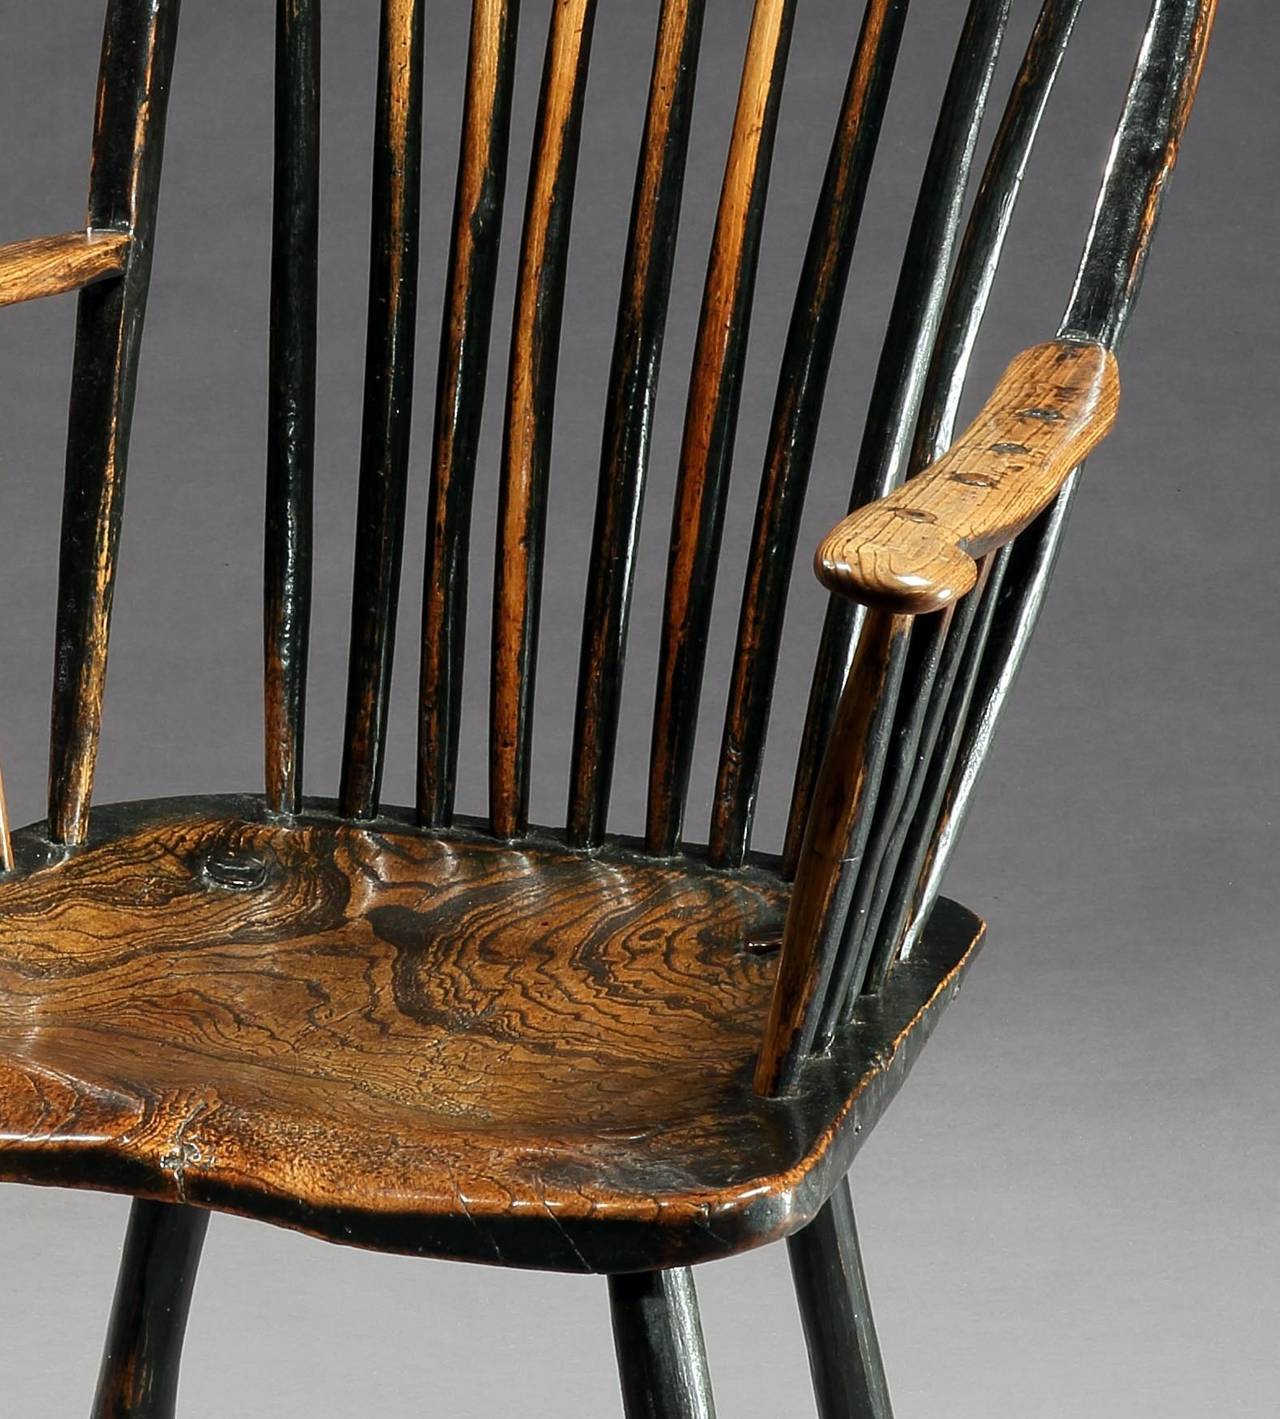 With well saddled seat and graphic movement to the spindles
Ash and elm with traces of original painted surface.